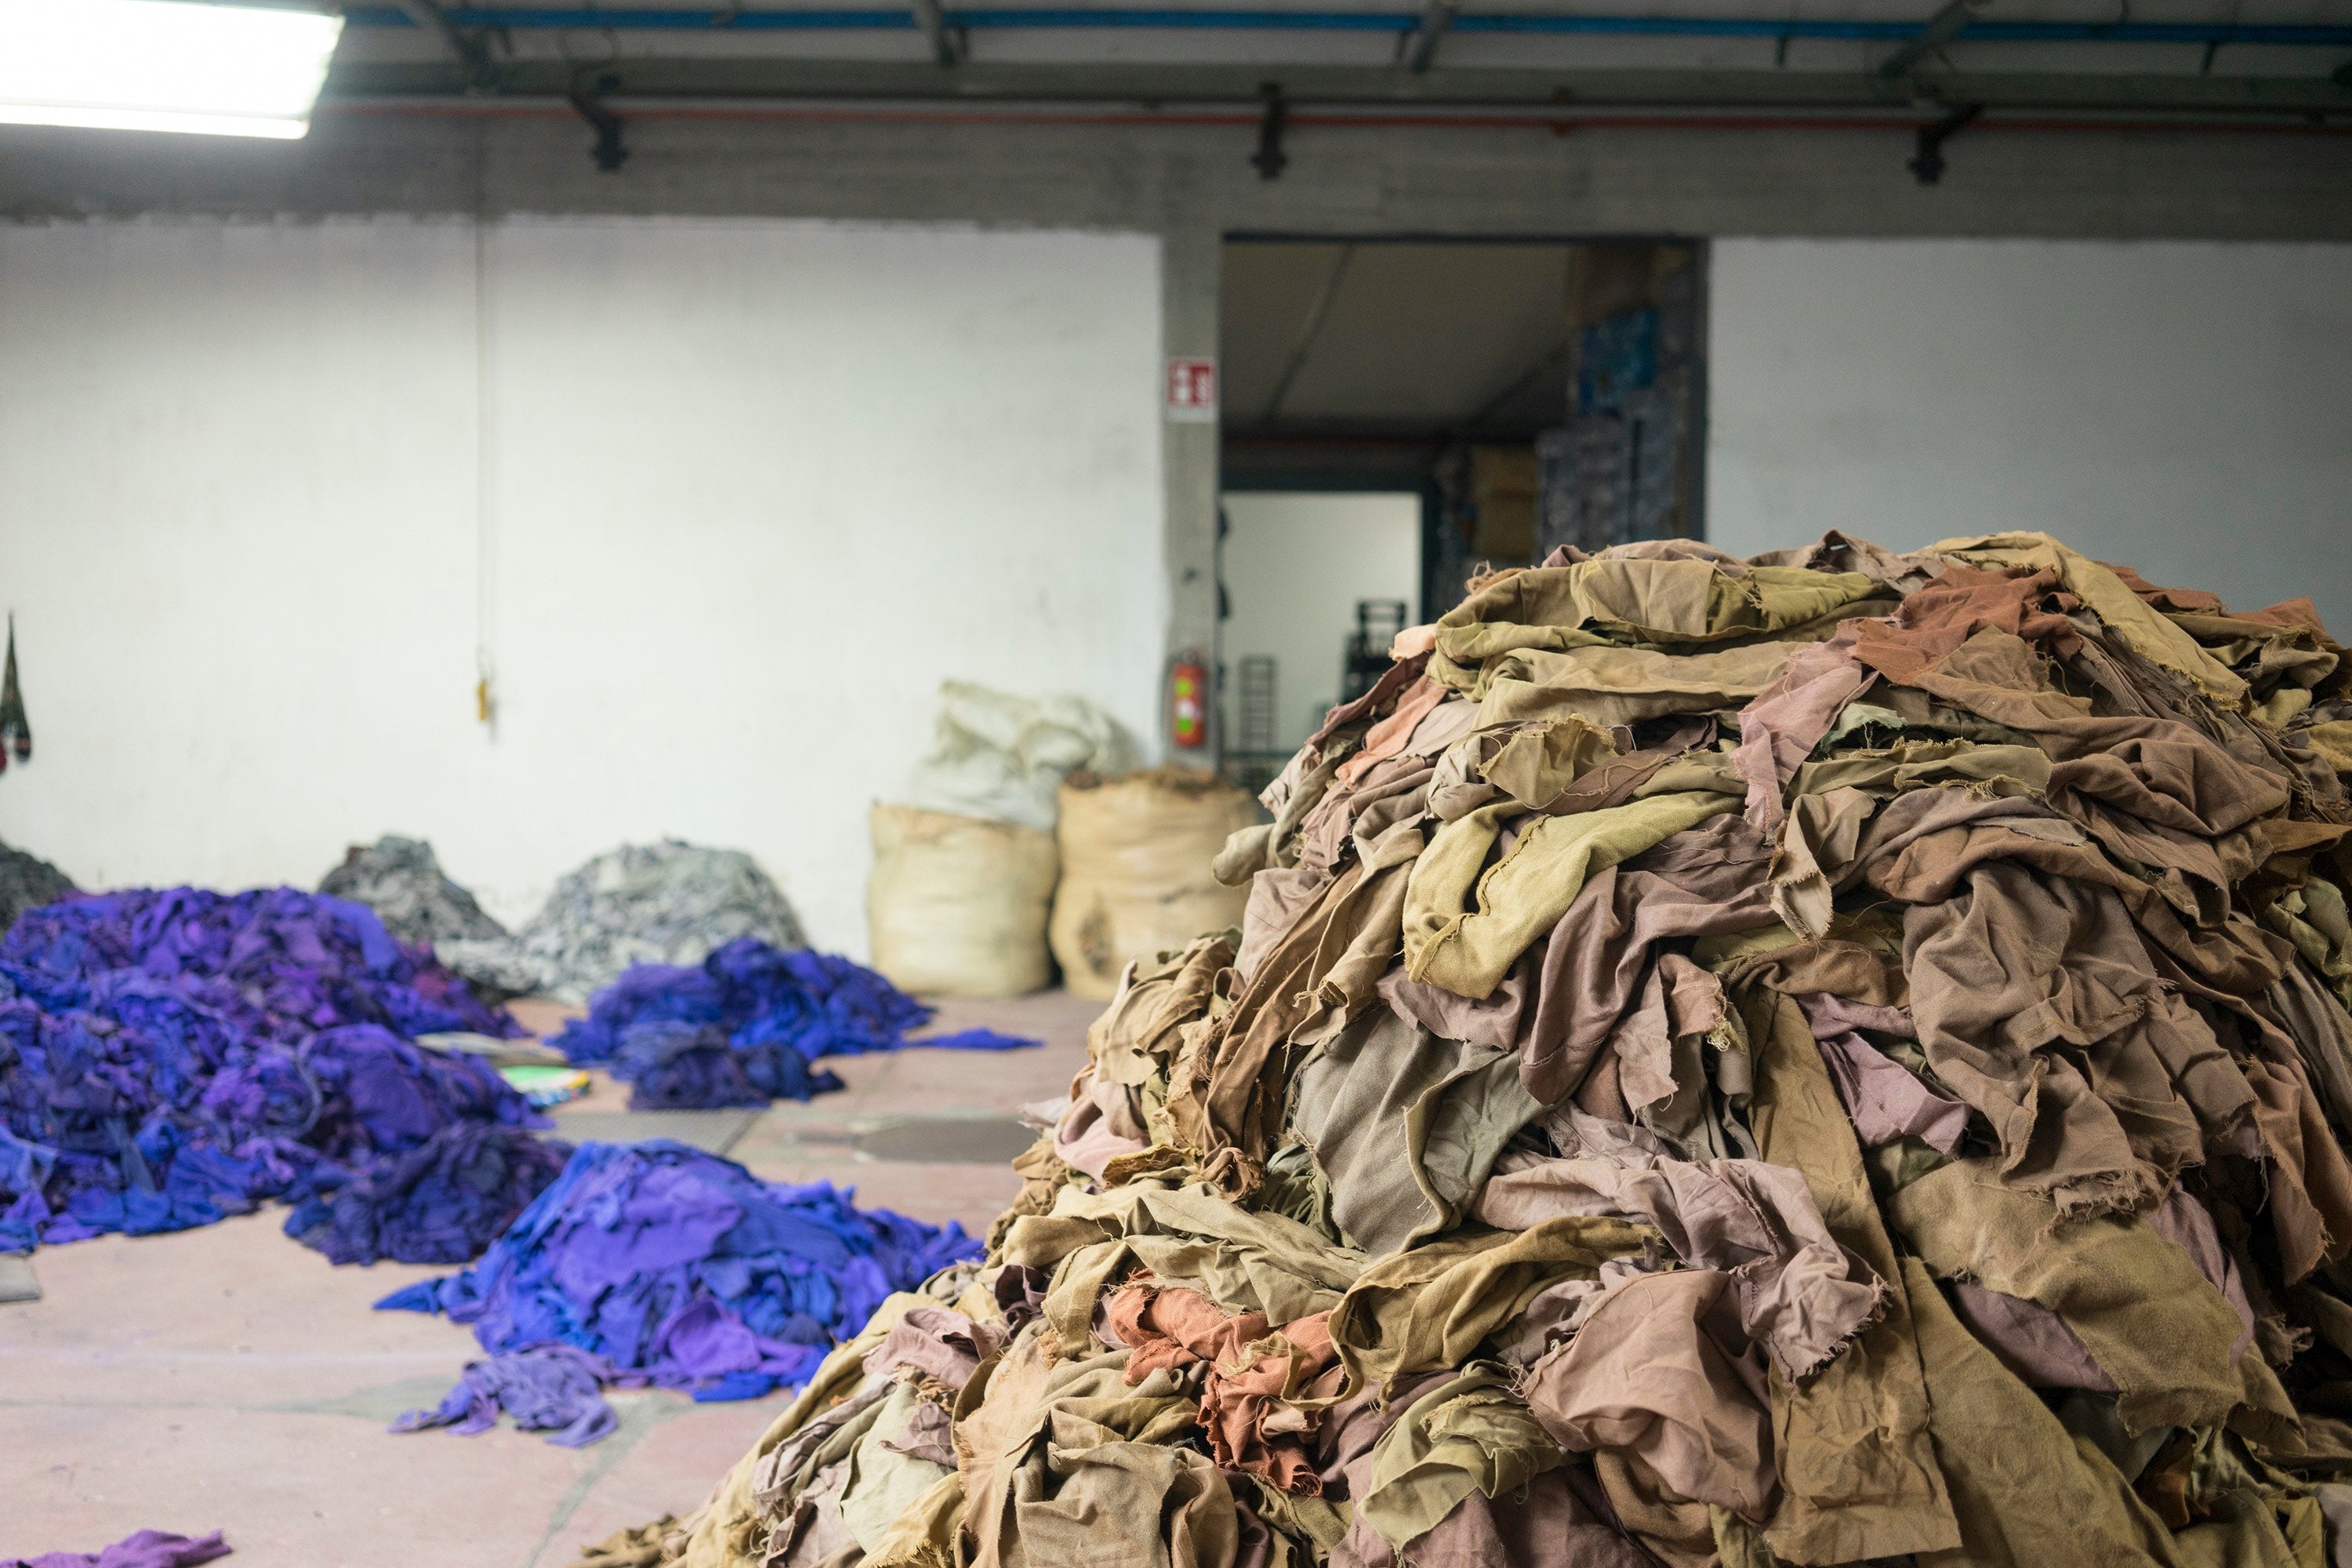 Used woollen garments shredded and sorted into colour piles, ready for recycling